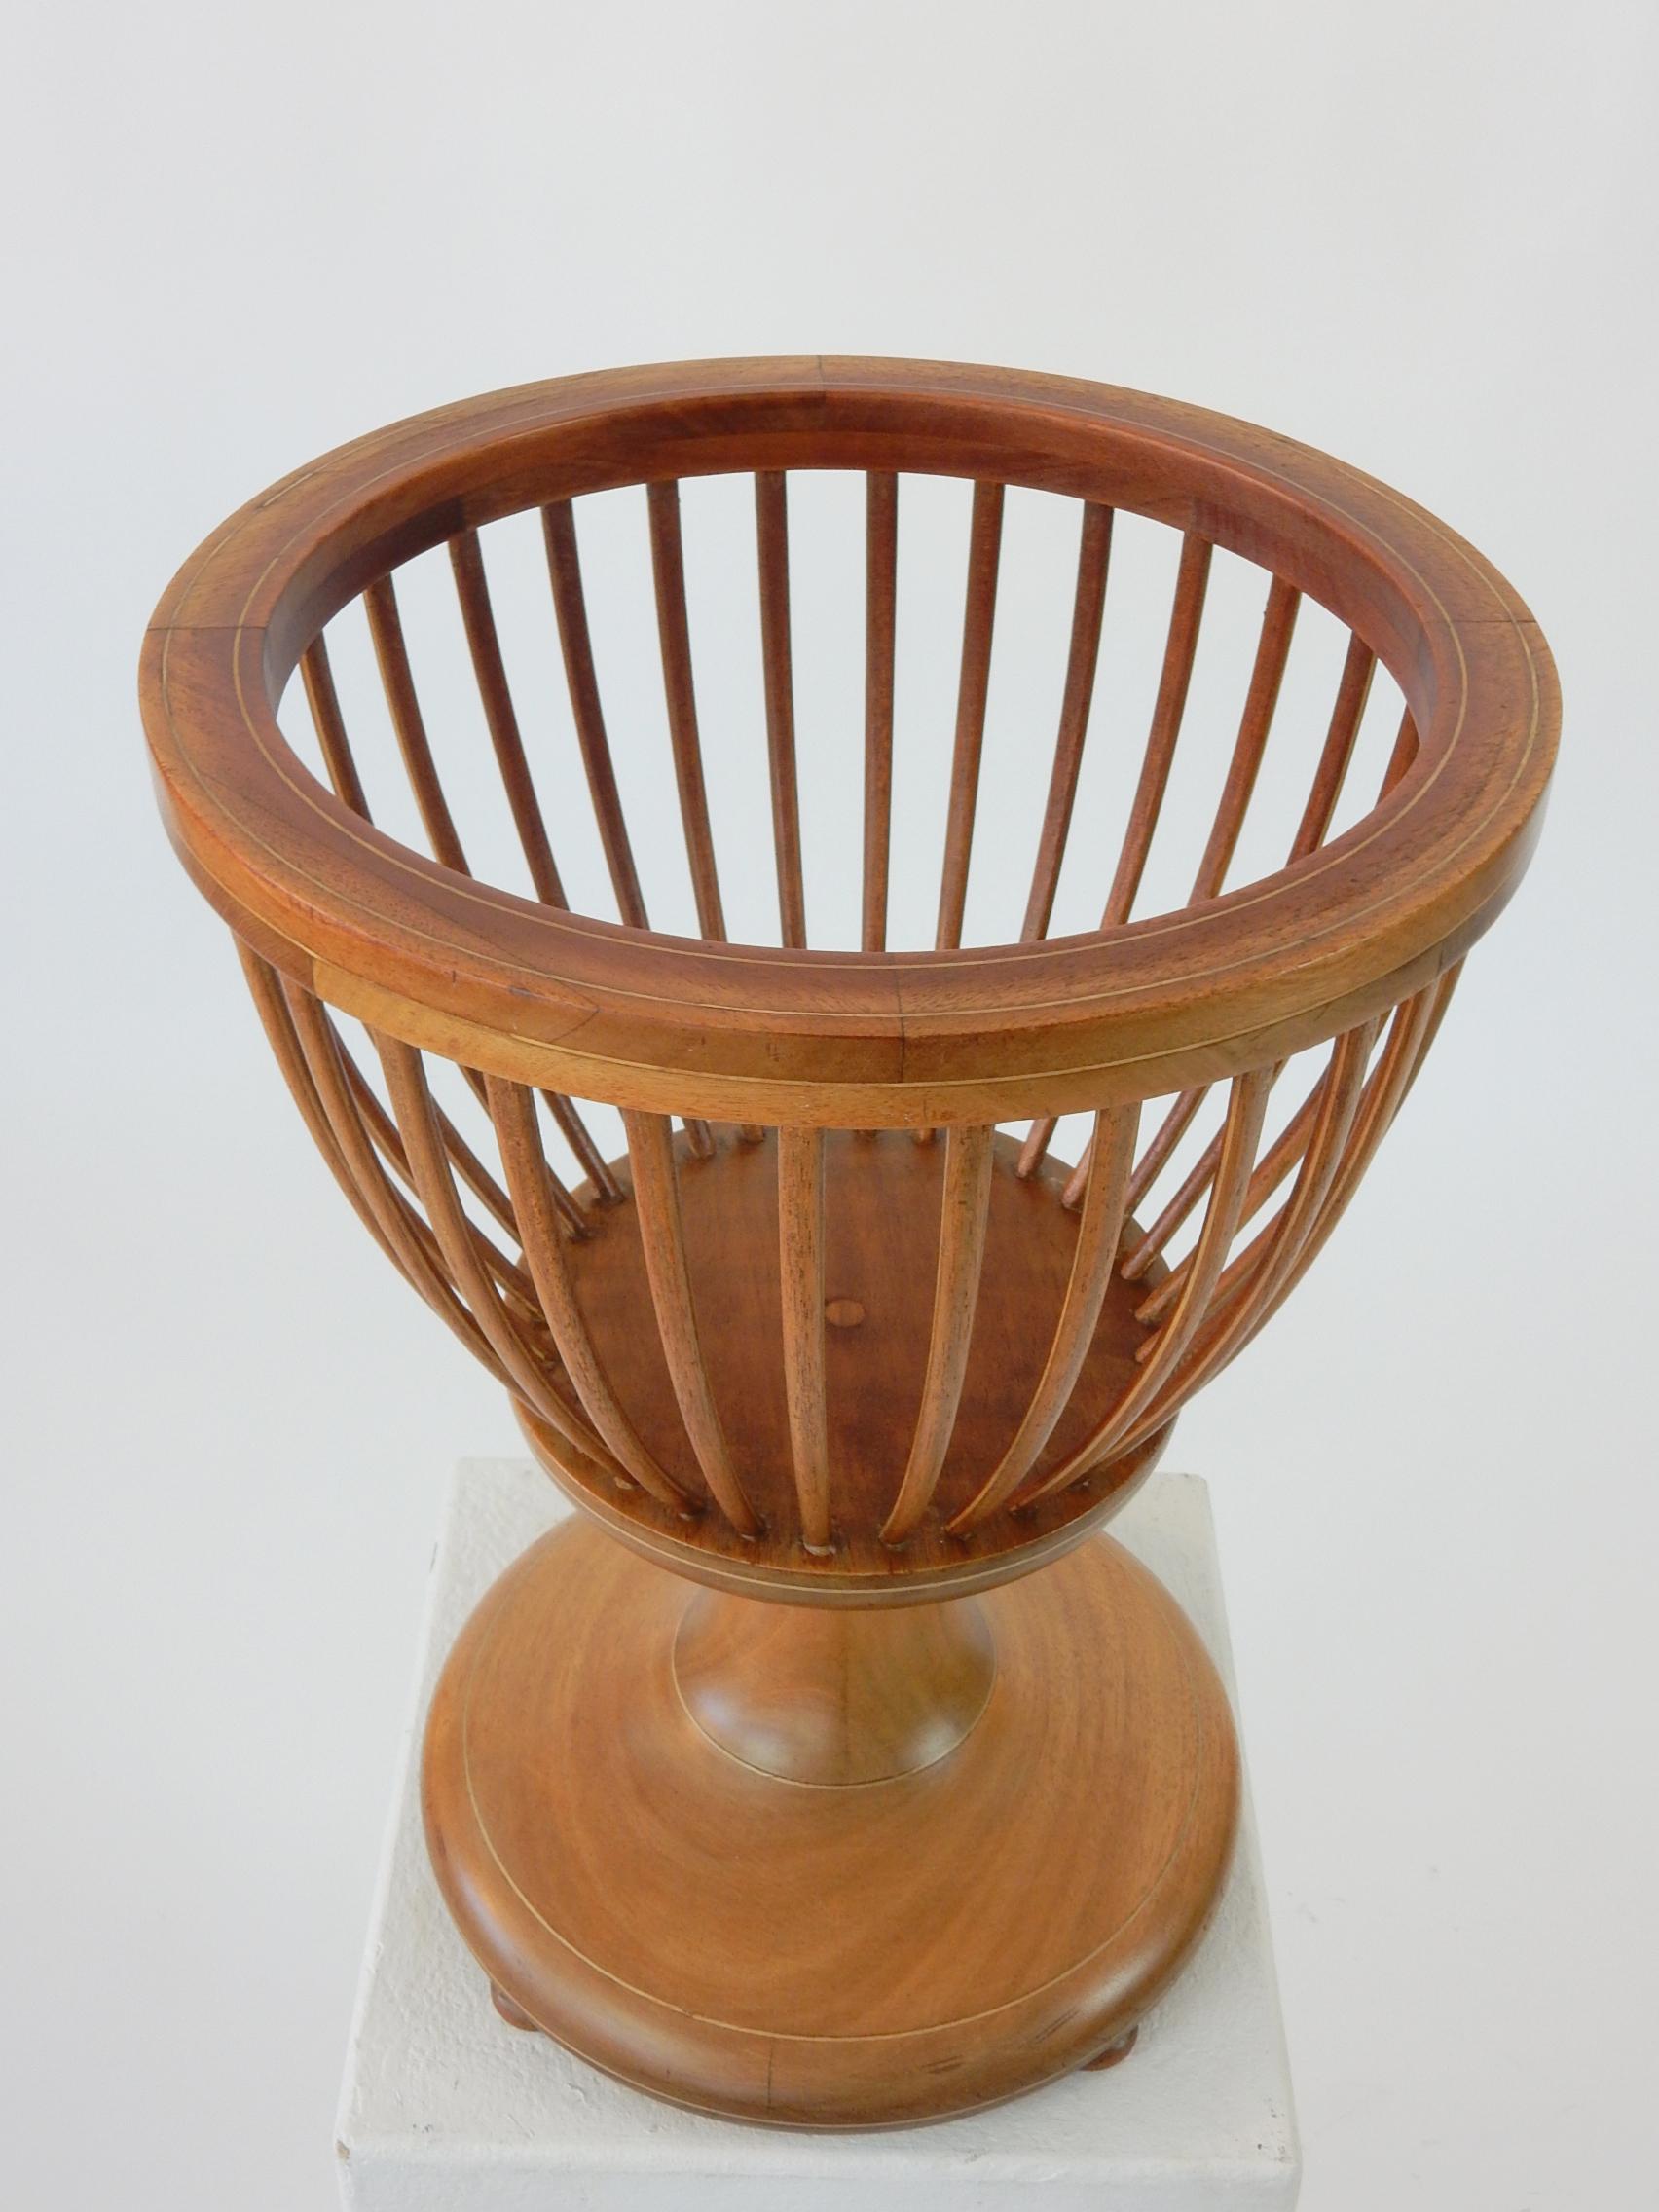 Early Victorian 19th Century Slatted Inlaid Mahogany and Copper Jardinièr Planter For Sale